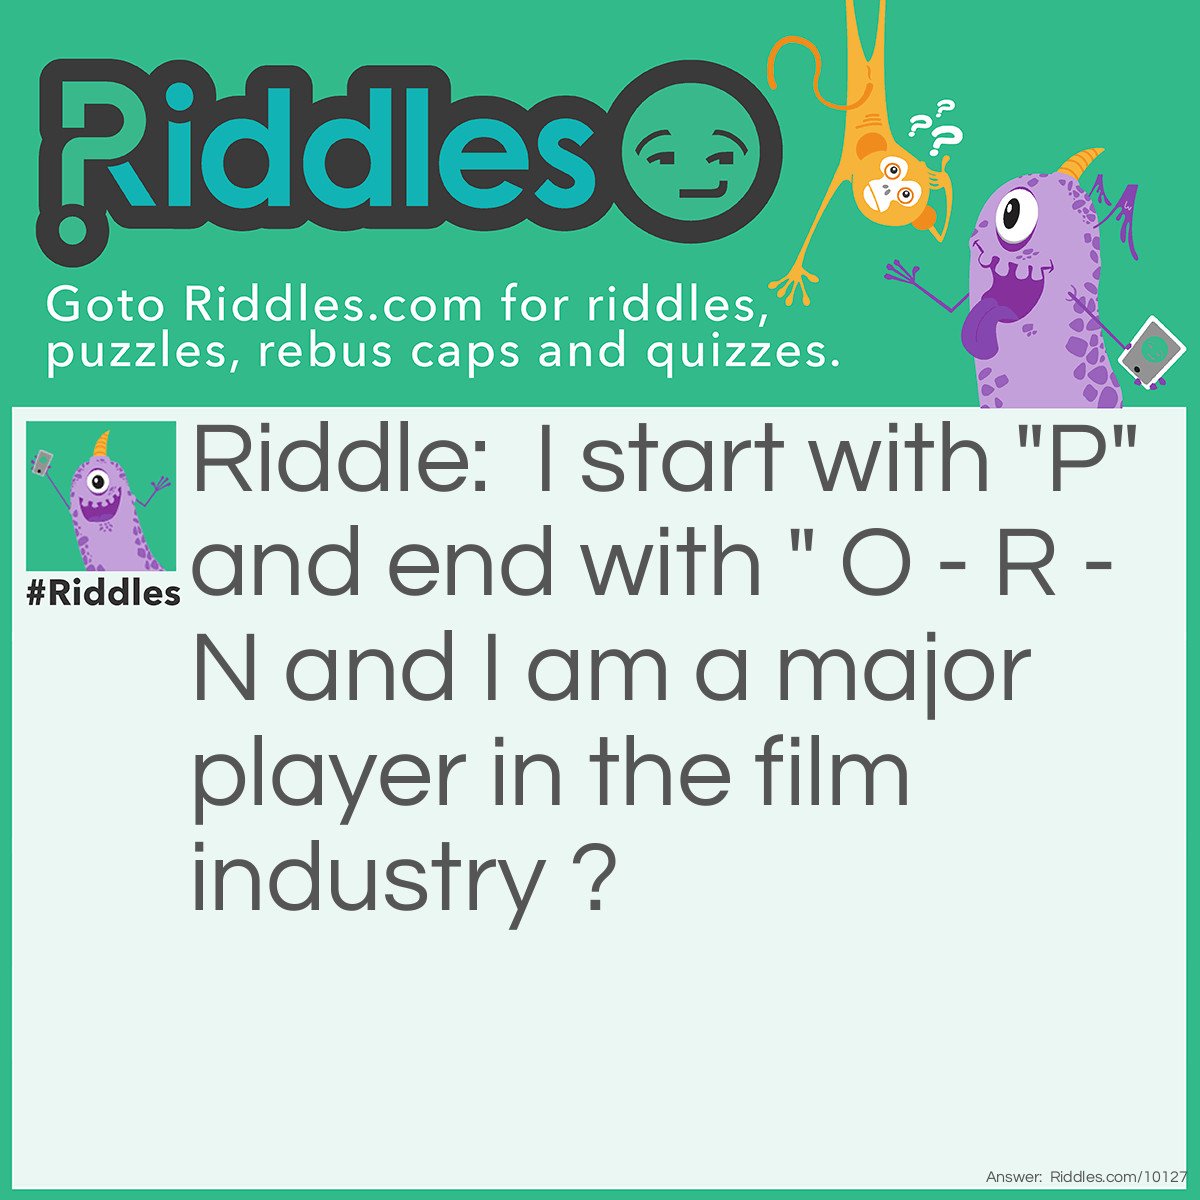 Riddle: I start with "P" and end with " O - R - N and I am a major player in the film industry ? Answer: Popcorn